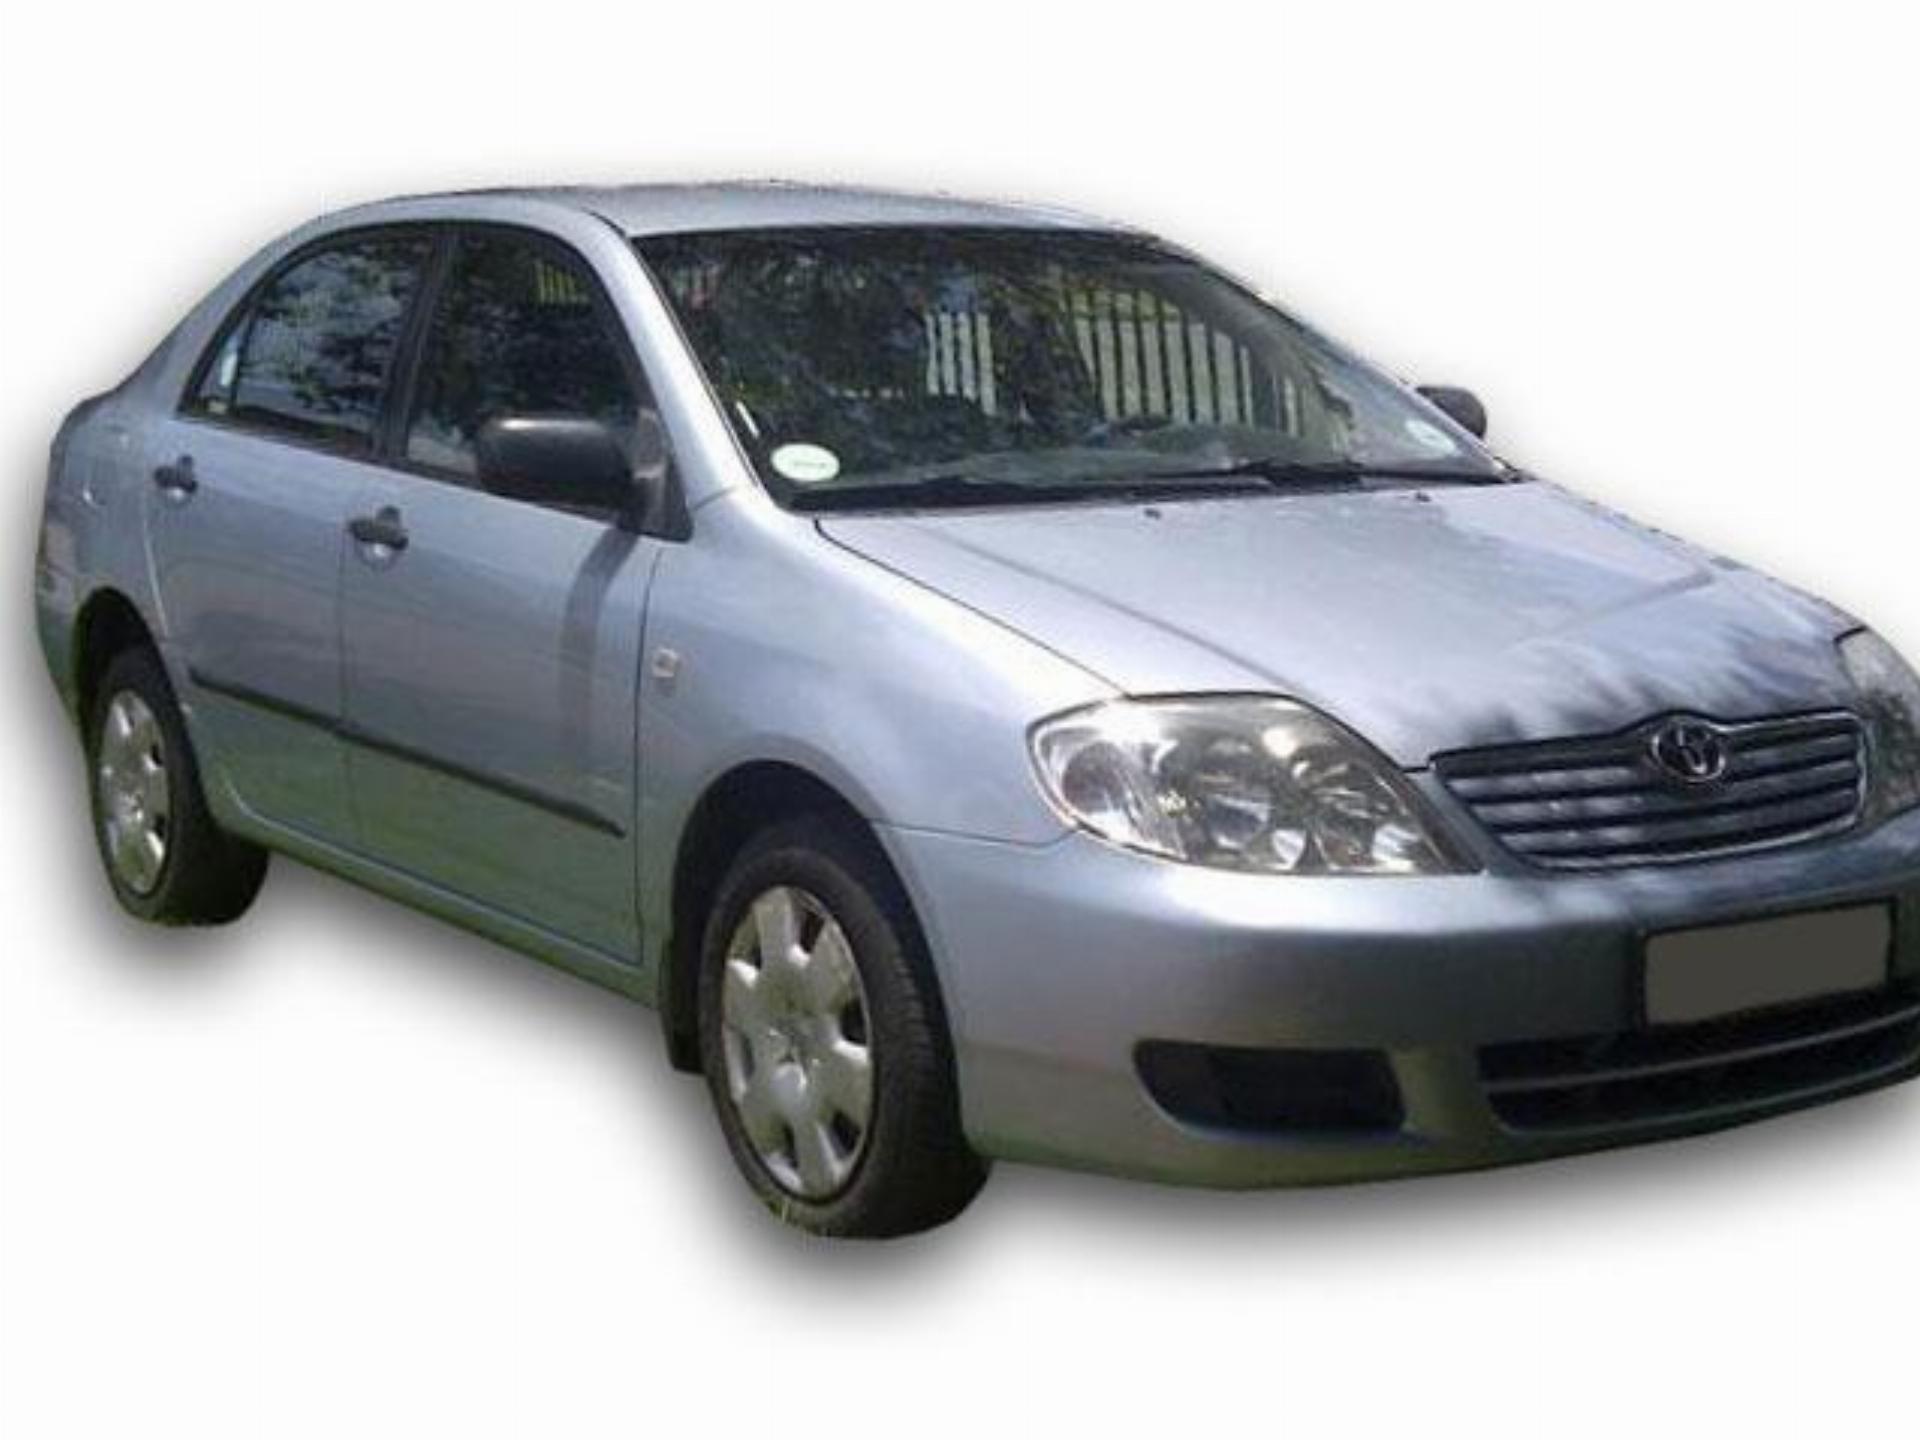 Used Toyota Corolla 1.6 Gle 2006 on auction - PV1001734